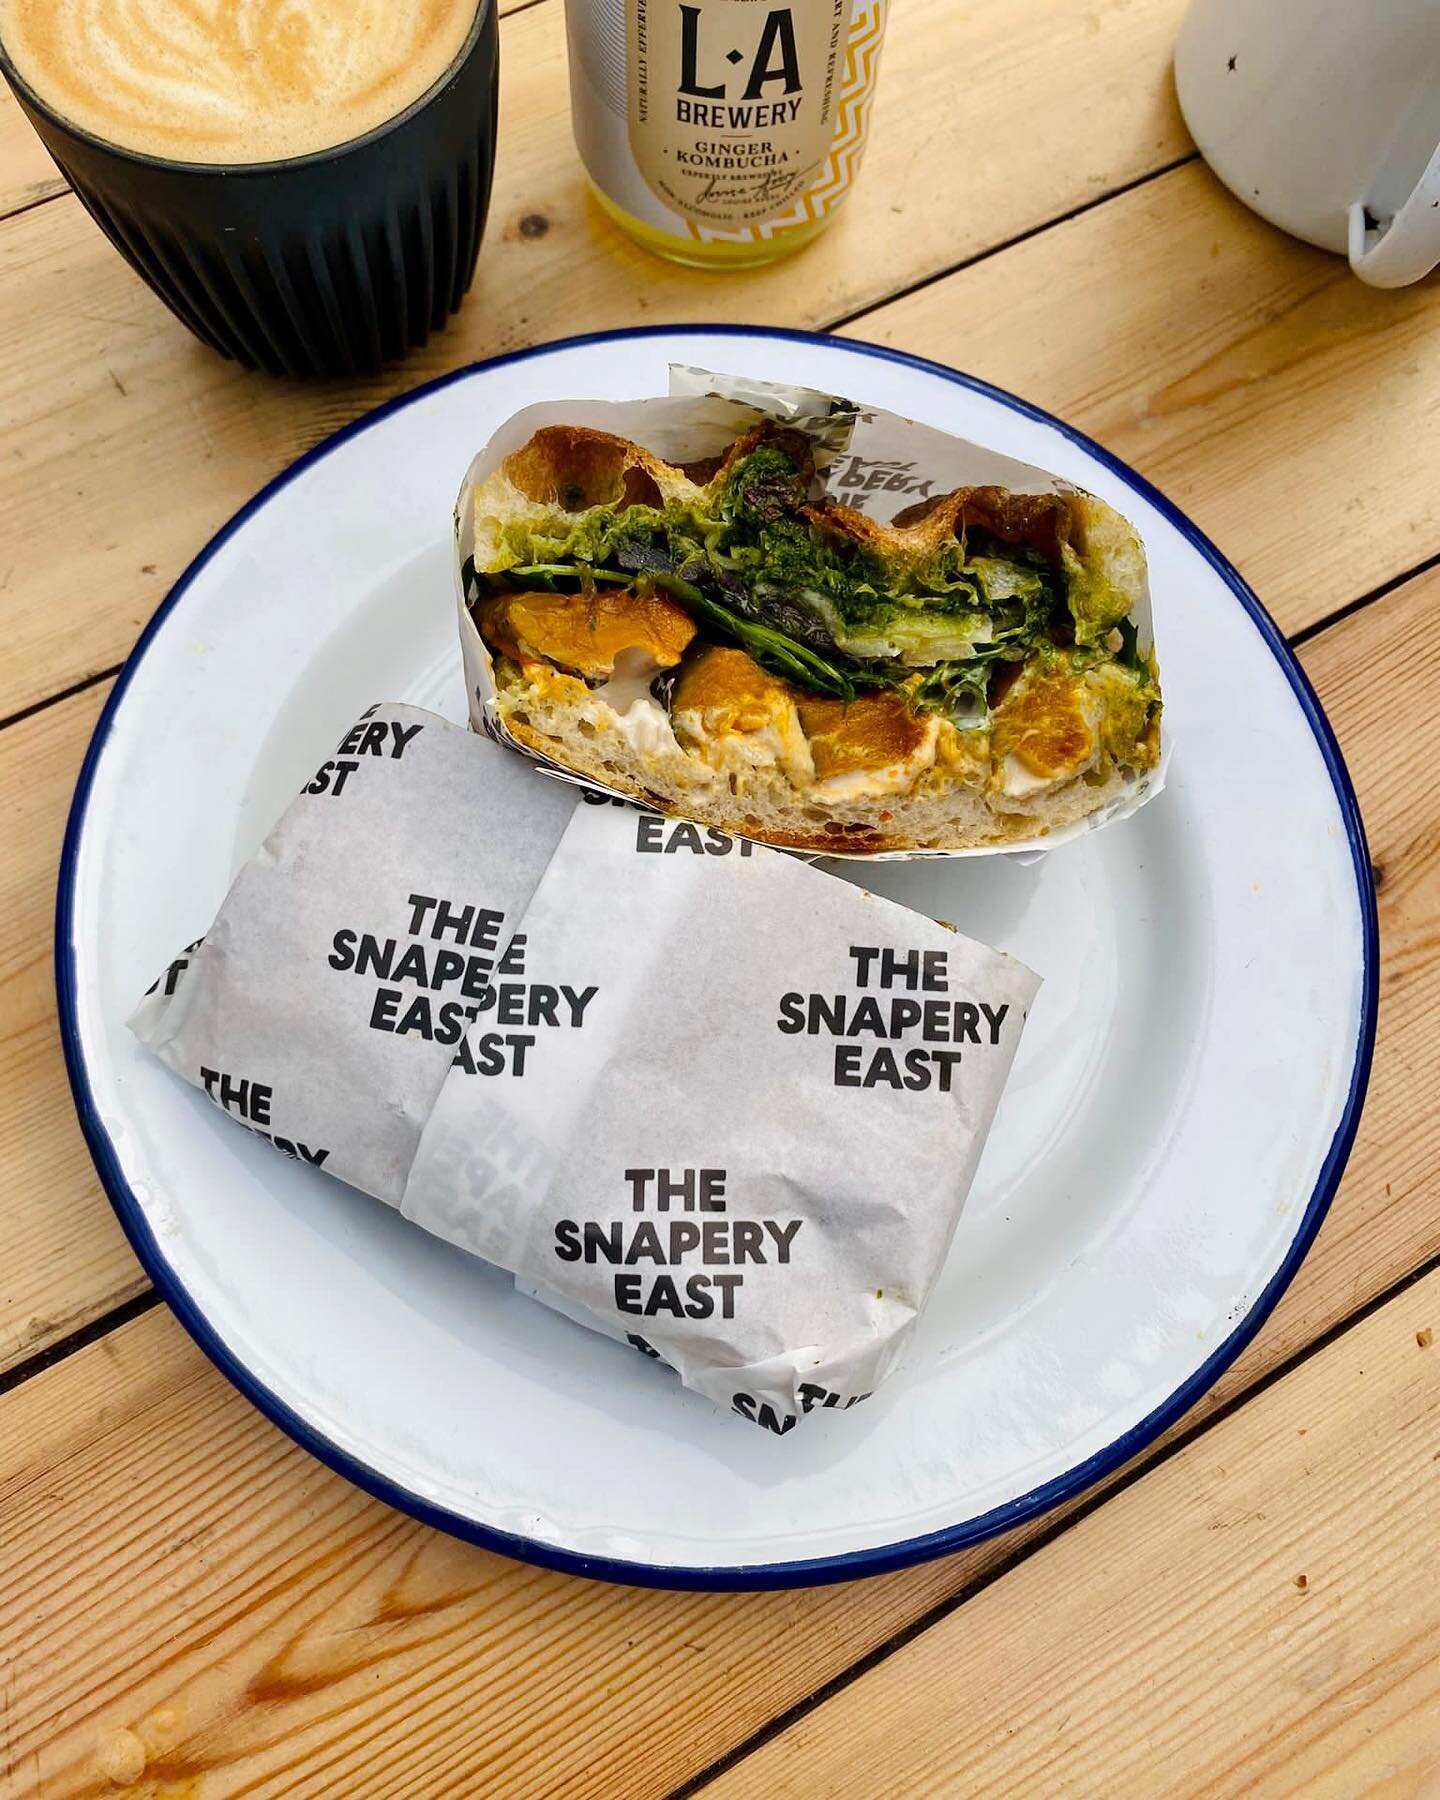 A recent project - Launch menu for the @thesnapery.east in London Fields. 
A sustainably focused menu for this very busy wholesale bakery, retail space and cafe making some of the best bread around and selling great produce too.